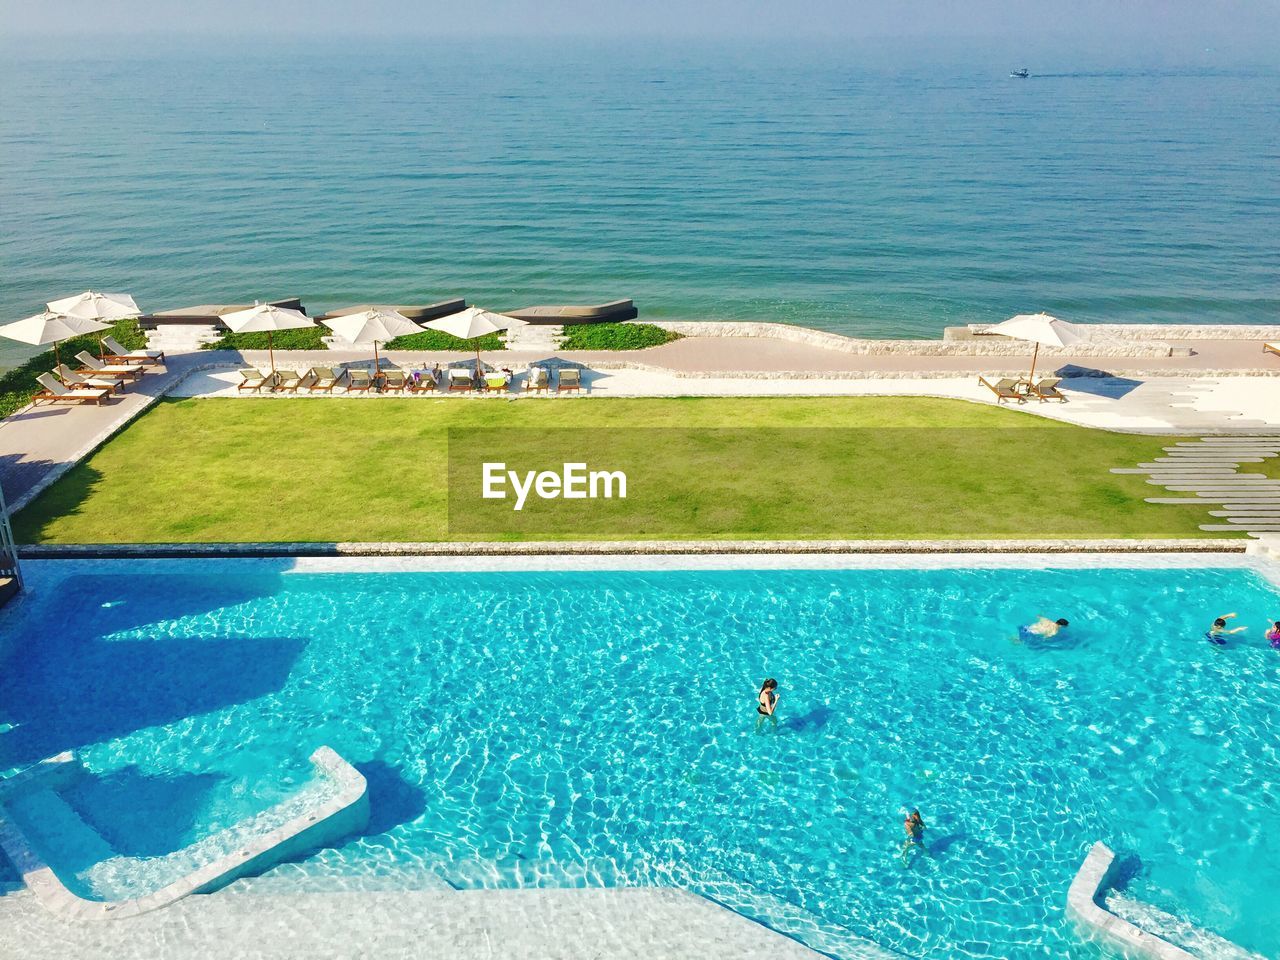 HIGH ANGLE VIEW OF SWIMMING POOL ON BEACH